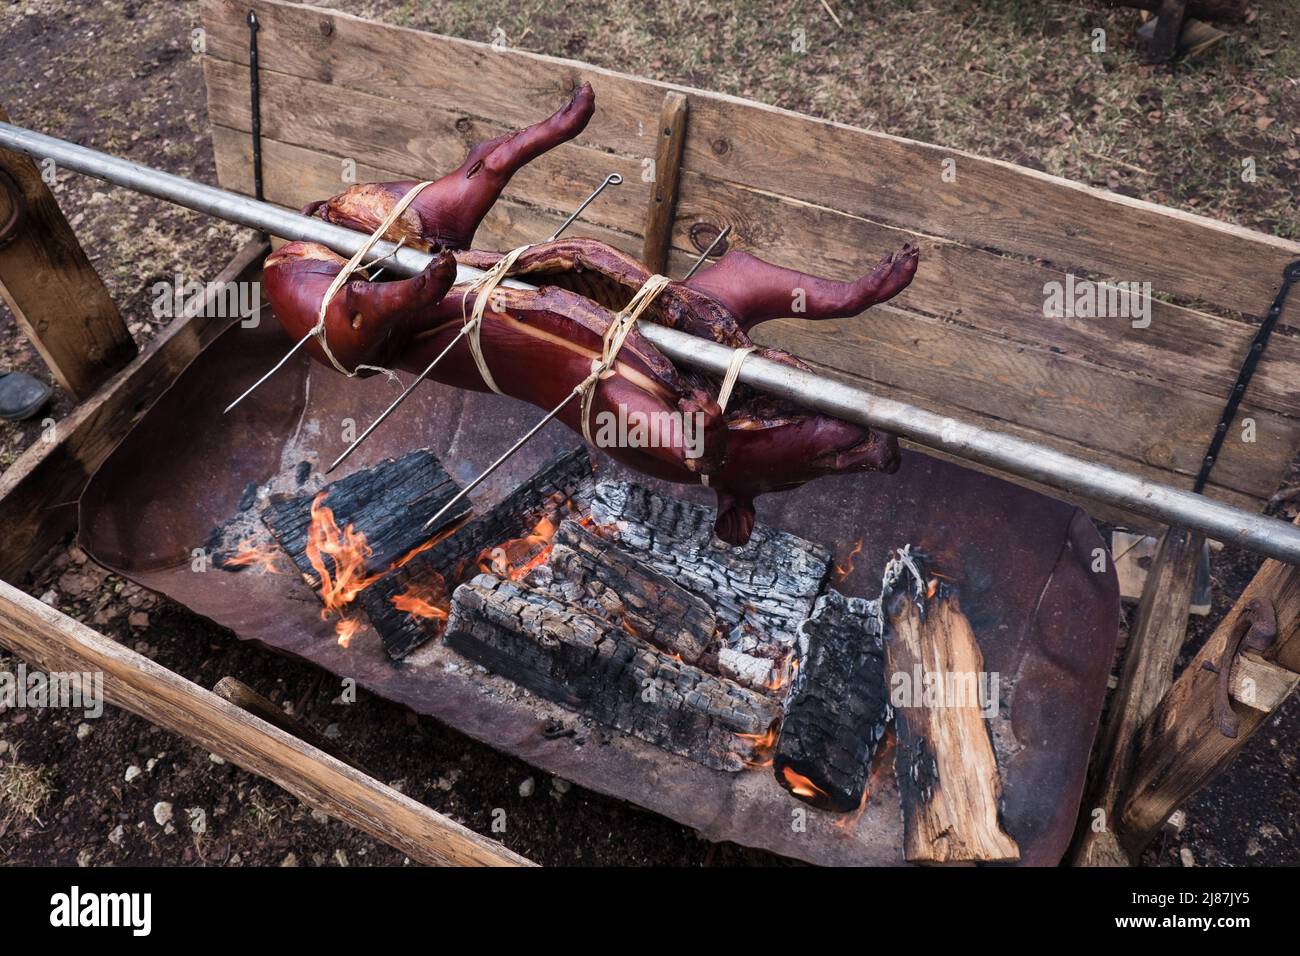 Piglet on grill, roasting pork. Cooking a whole small pig on fire Stock Photo